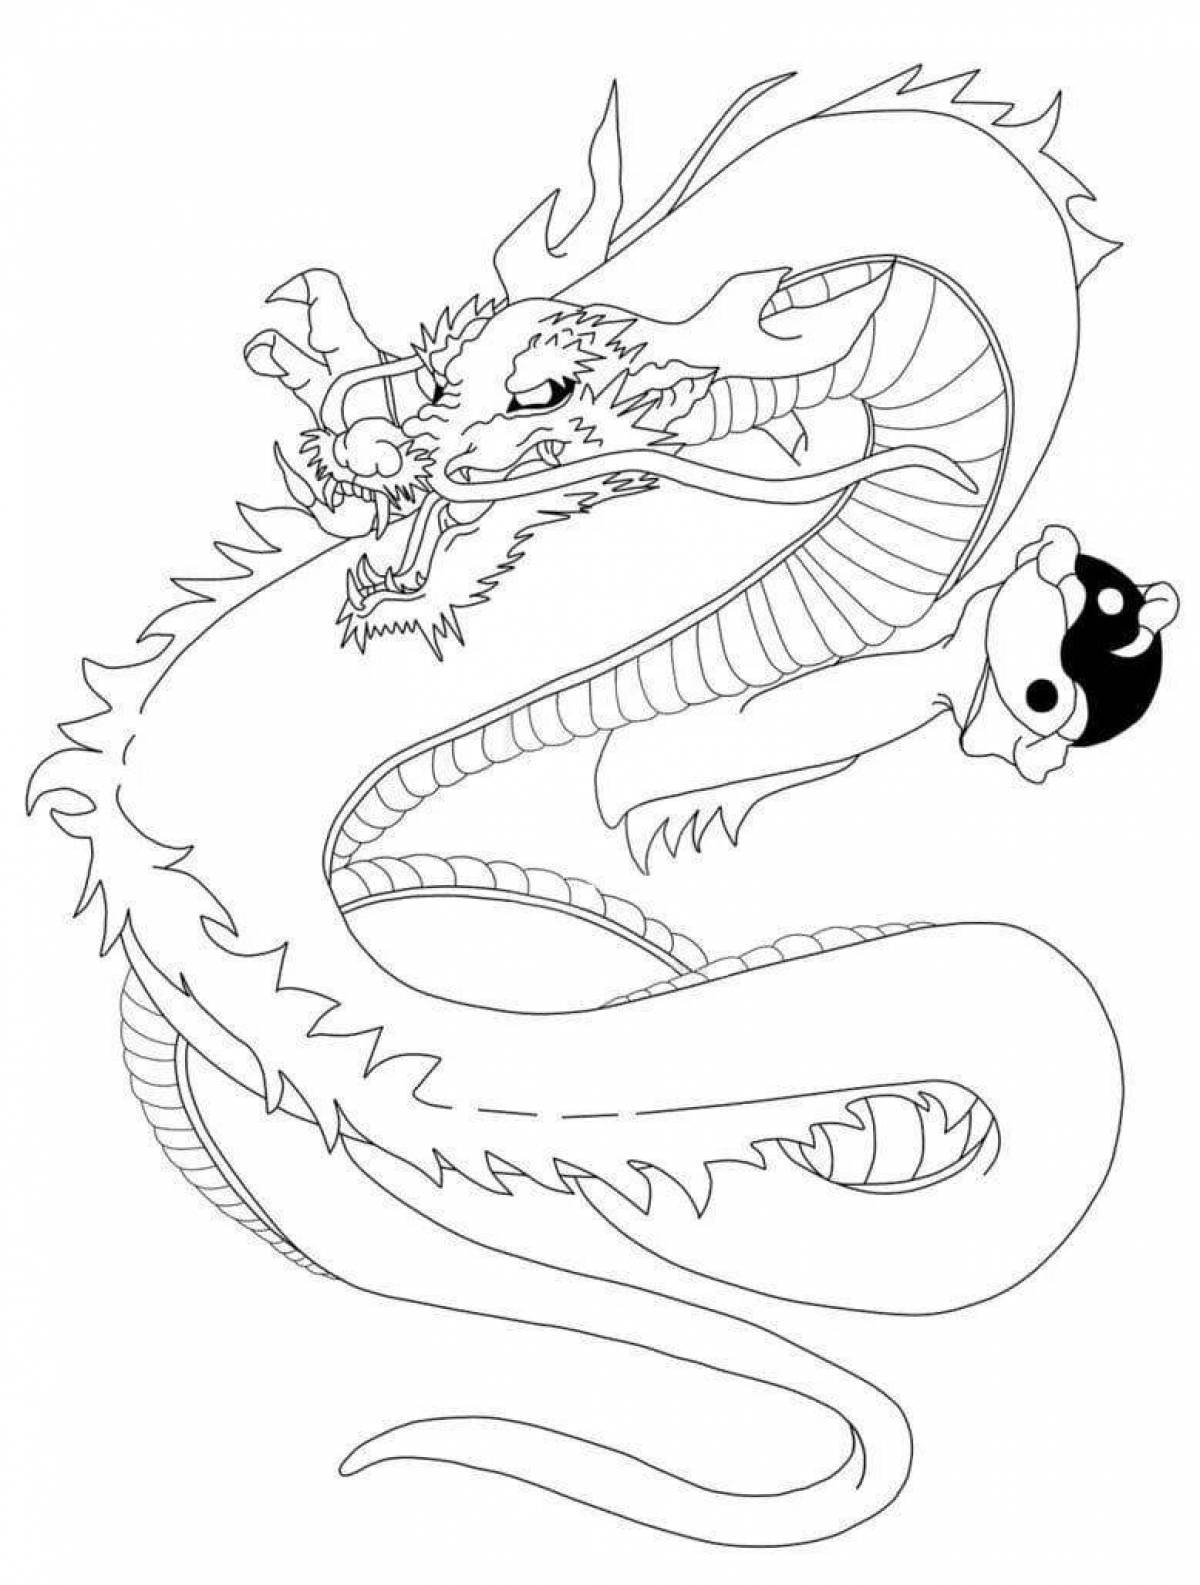 Dramatic chinese dragon coloring book for kids